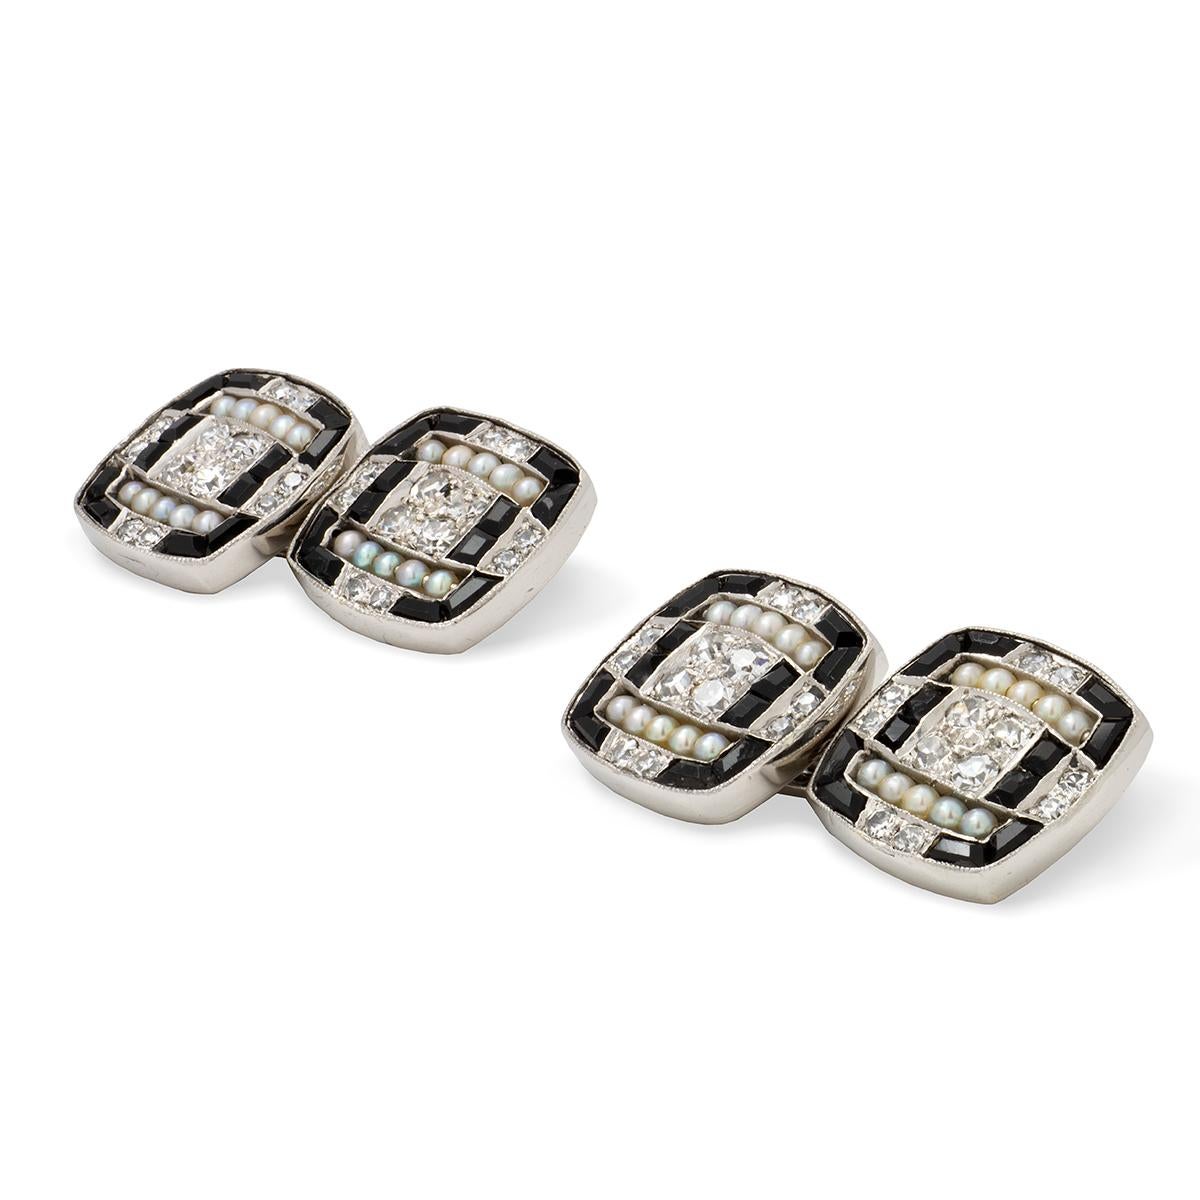 A pair of Art-Deco diamond, pearl and onyx cufflinks, each face set with swiss-cut diamonds, onyx and natural pearls in a geometric design, all set in platinum to a chain link, circa 1920, each plaque measuring approximately 1.3 x 1.3cm, gross